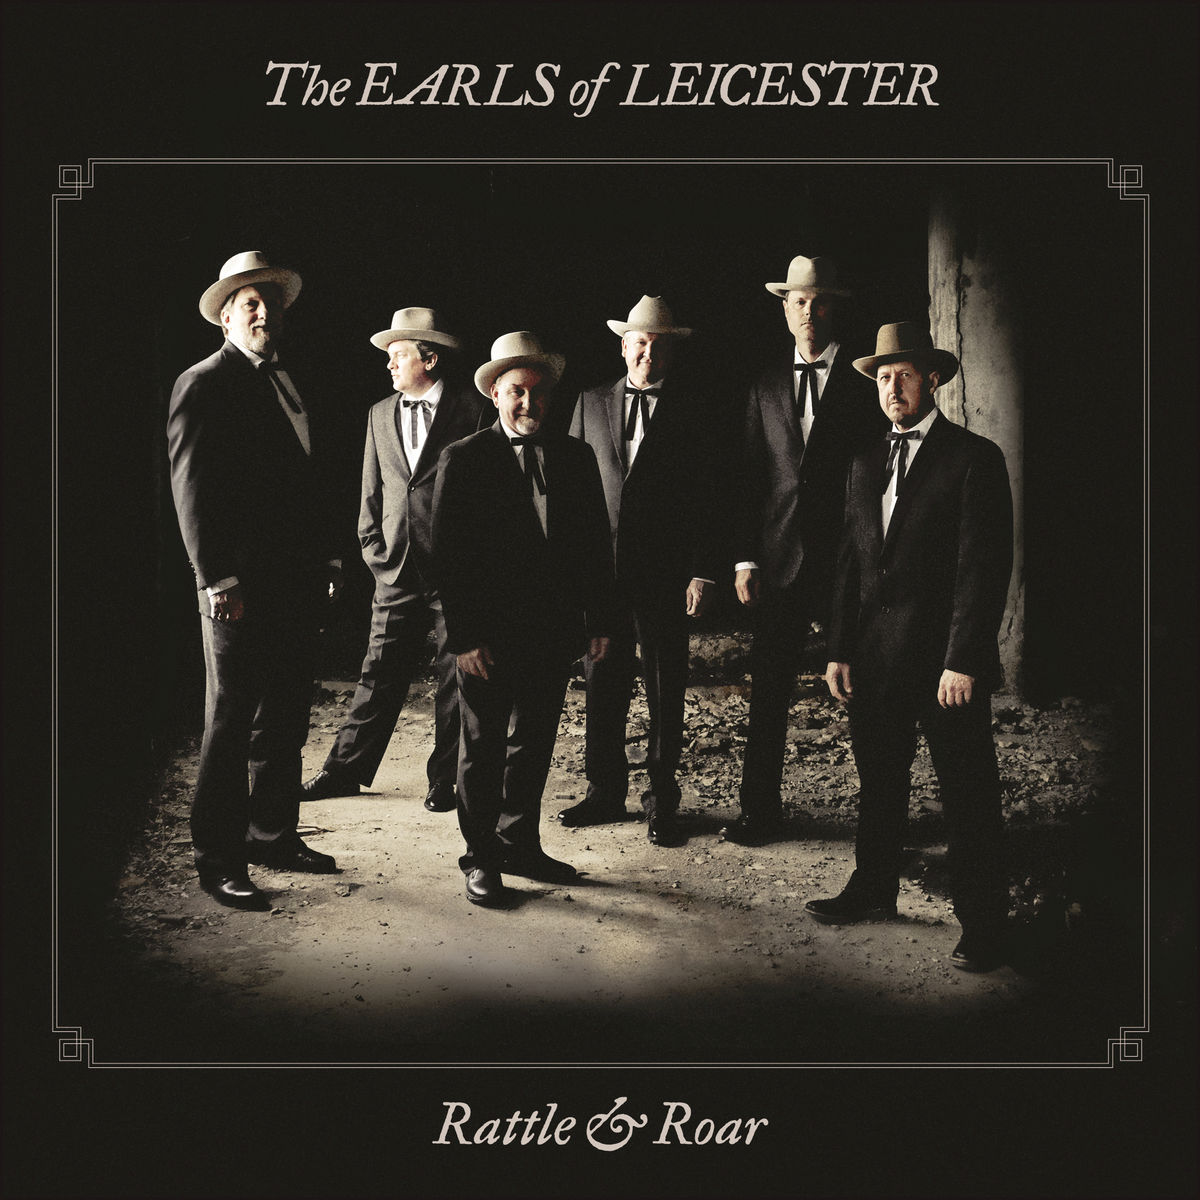 The Earls Of Leicester - Rattle & Roar (2016) [HDTracks FLAC 24bit/96kHz]